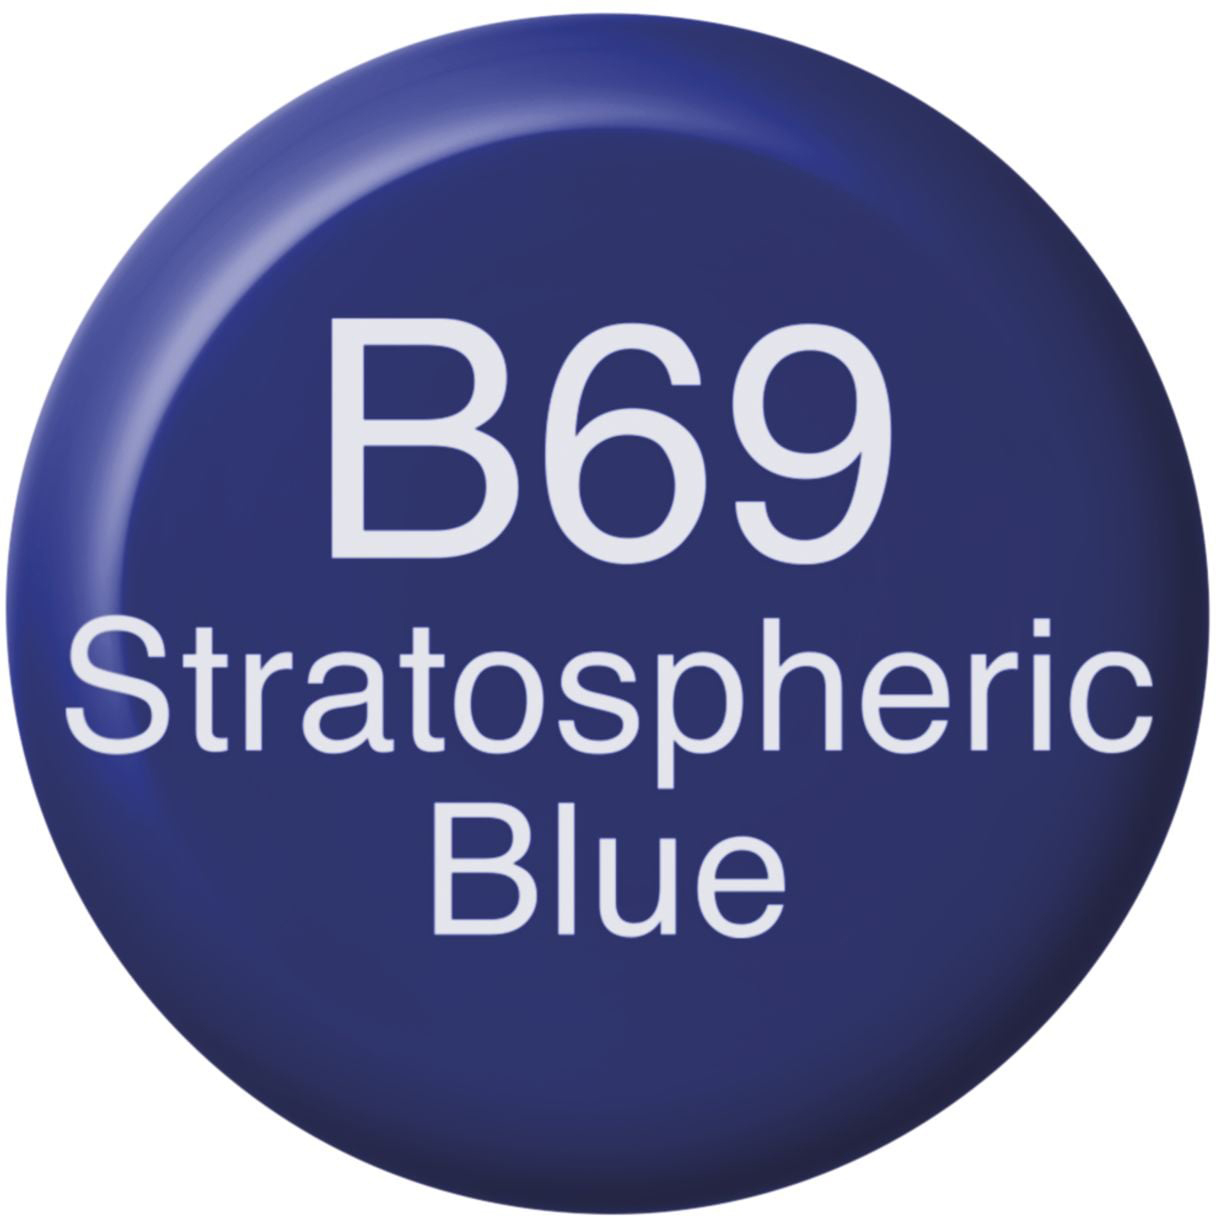 COPIC Ink Refill 21076308 B69 - Stratospheric Blue